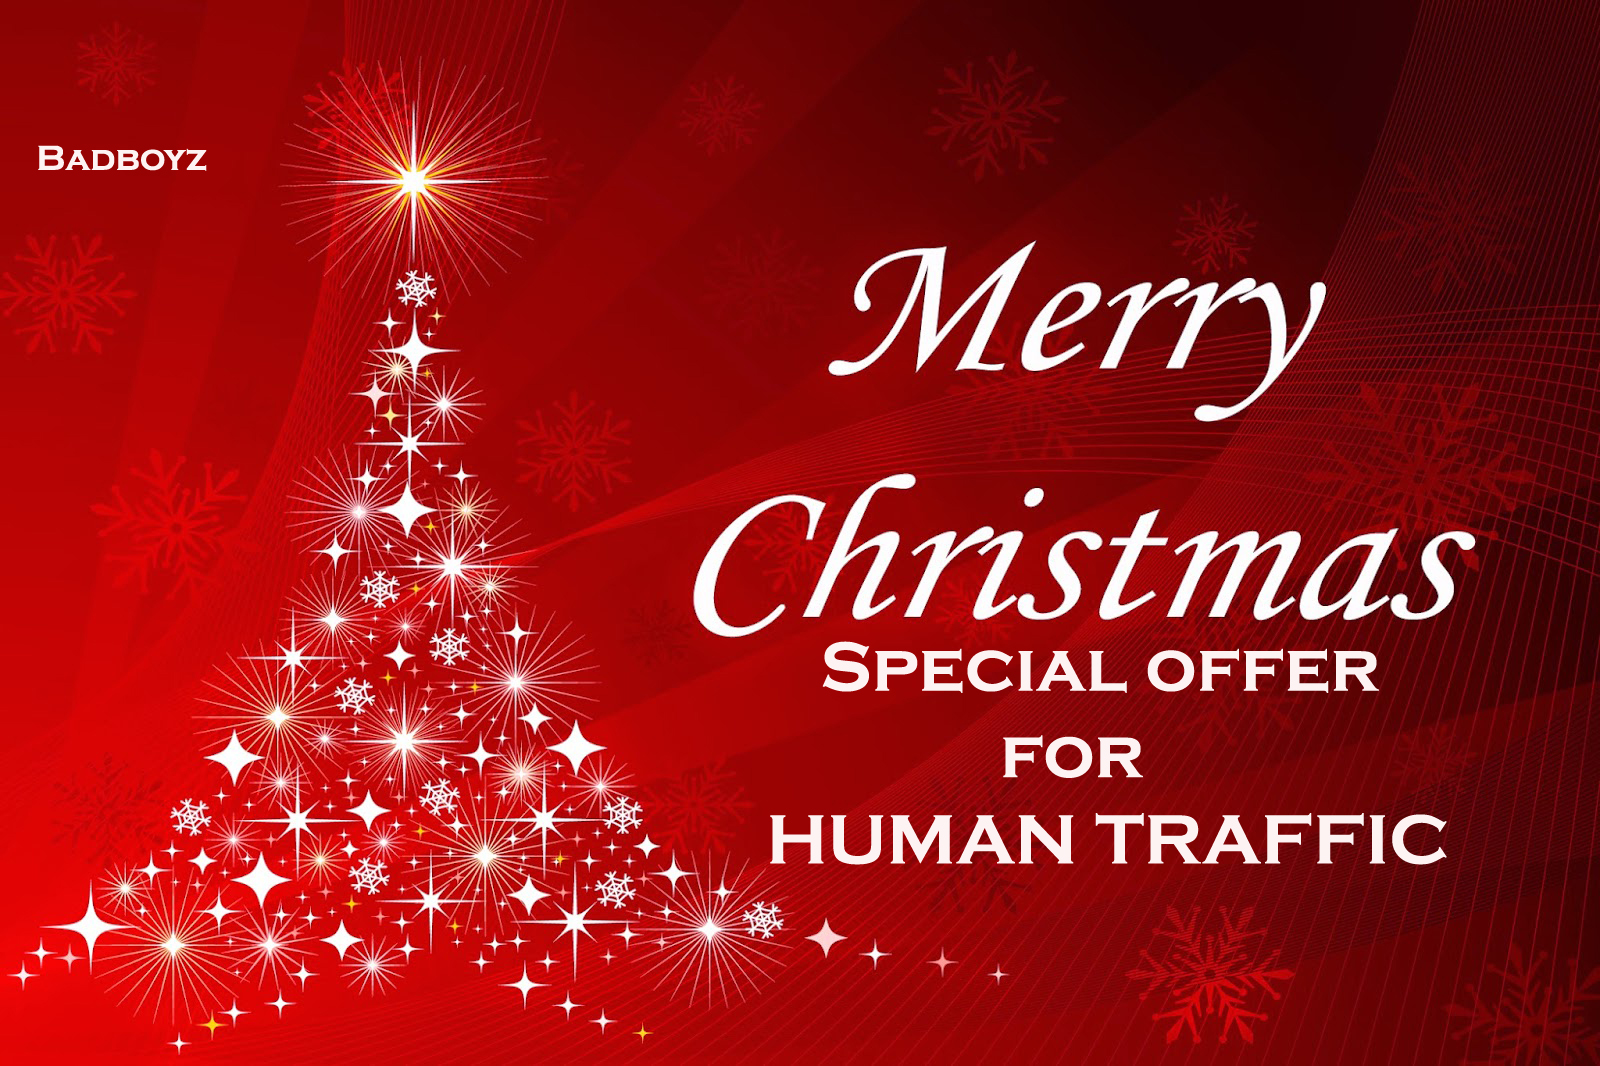 Get Unlimited Human Traffic to your website for 90 days